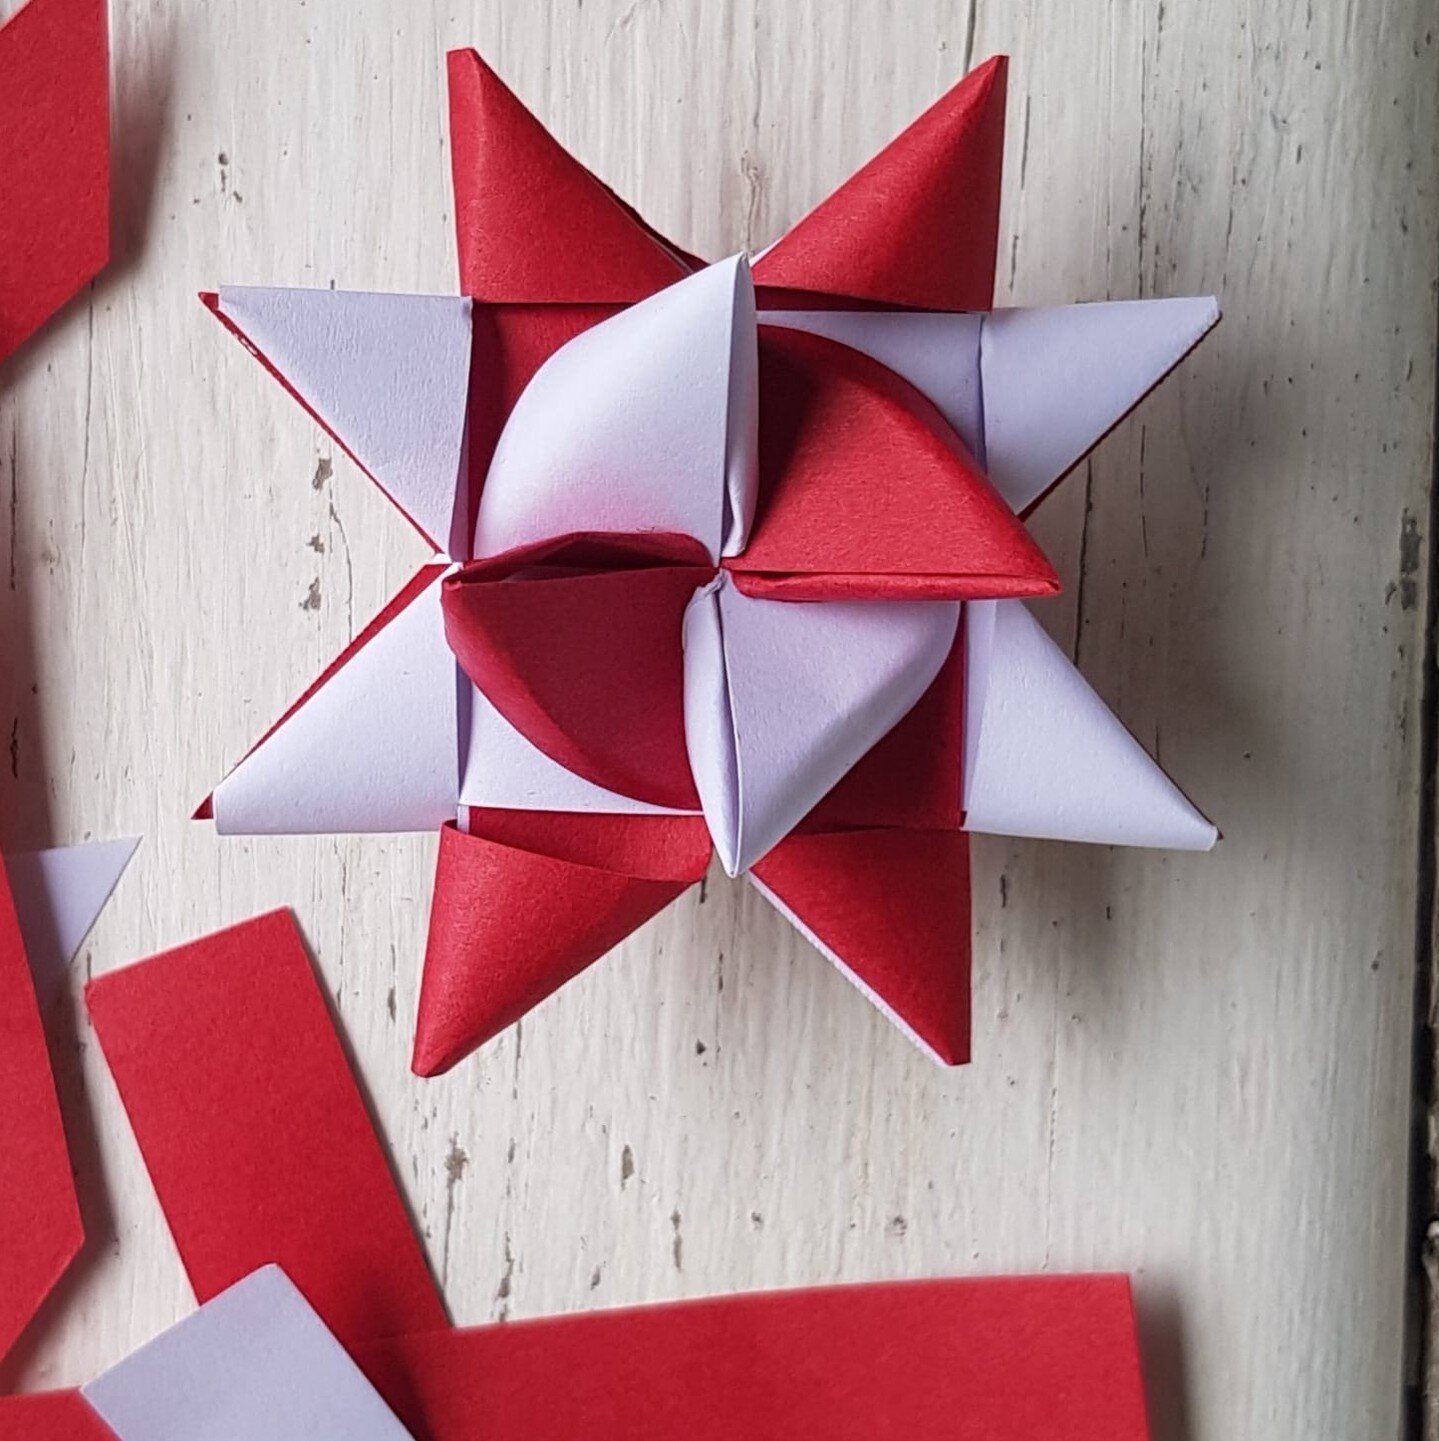 Julestjerner (Danish paper woven stars) are an iconic sight in Scandinavia at Christmas and can be seen hanging in windows and adorning every Christmas tree. Taught to make them by her Danish grandmother when she was small, Becci from @hyggestyle.co.